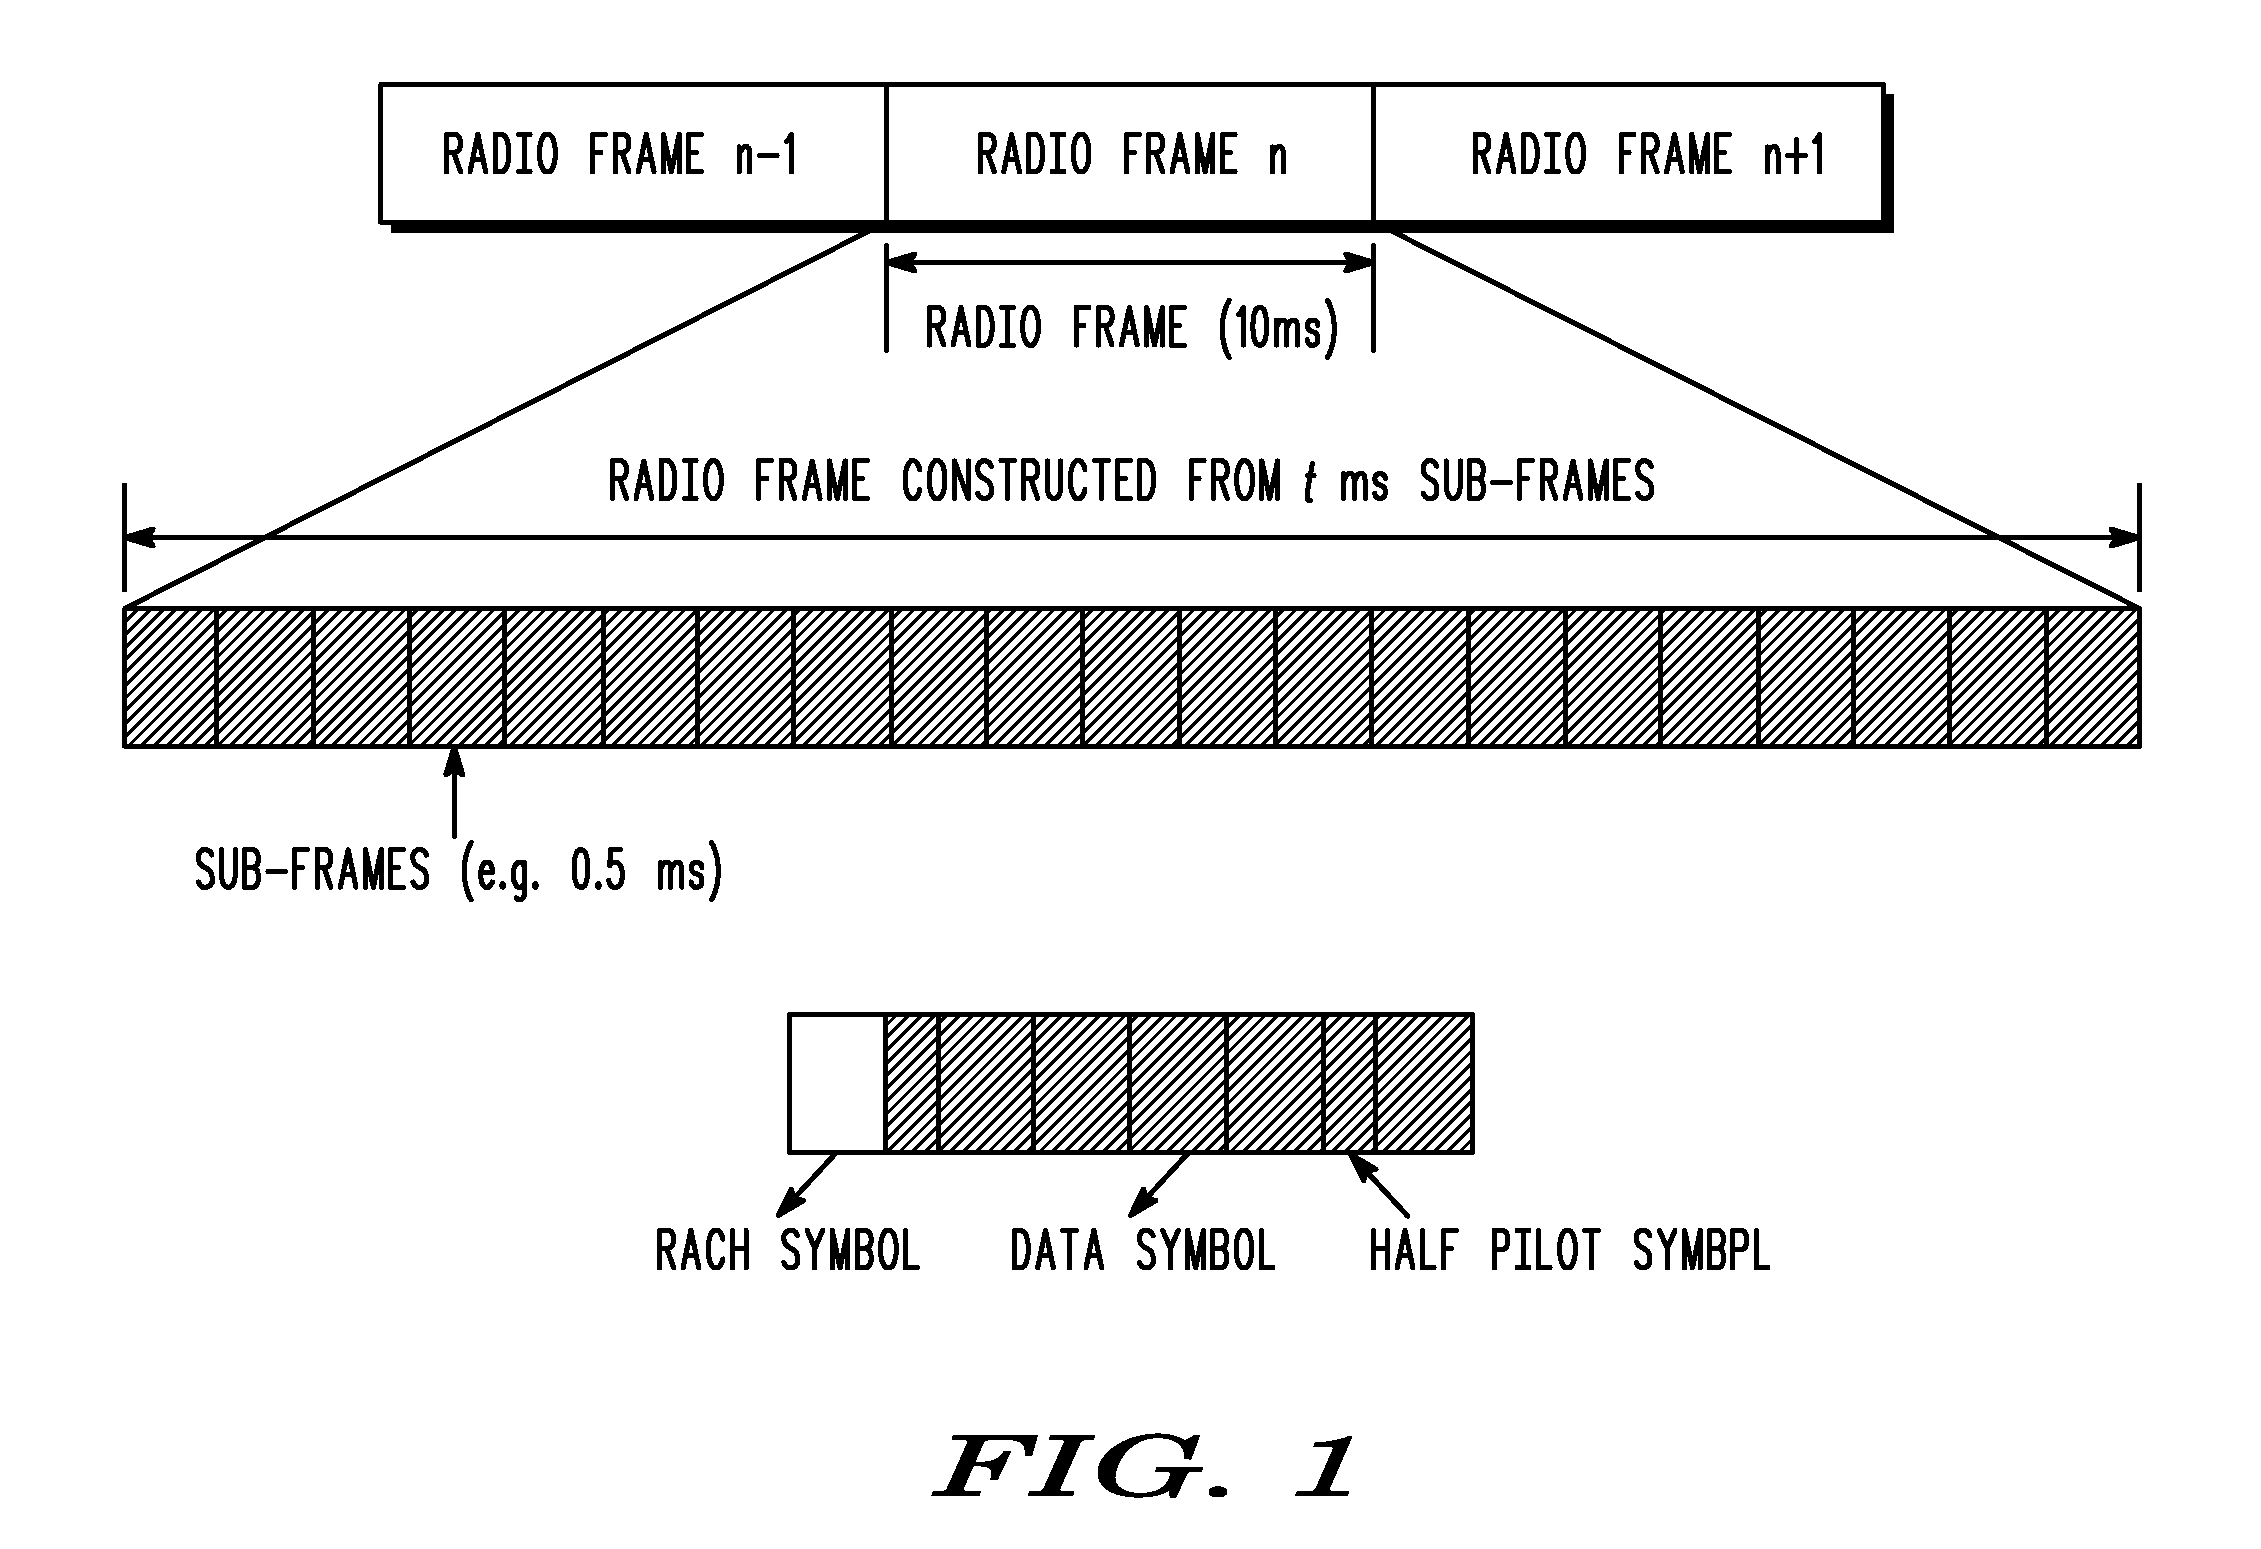 Preamble sequencing for random access channel in a communication system